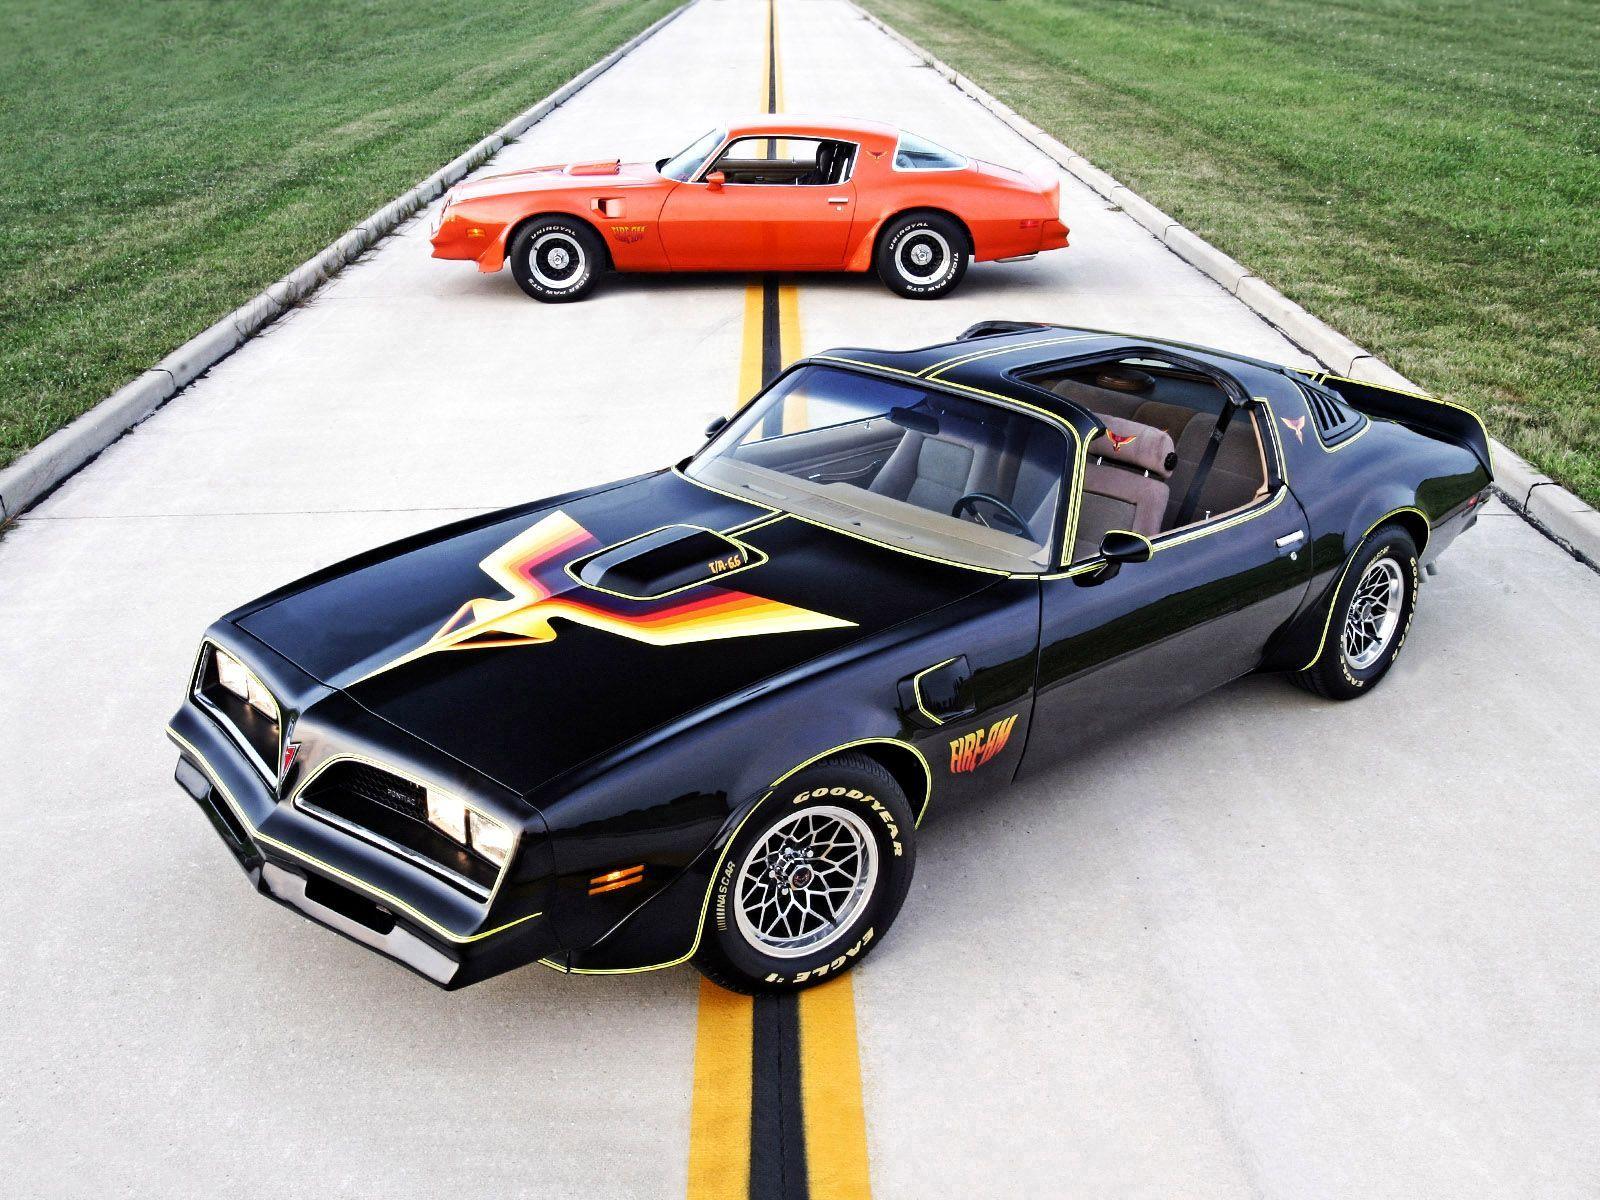 1977 78 Pontiac Firebird Trans Am They Looked Ok But I Don't Like